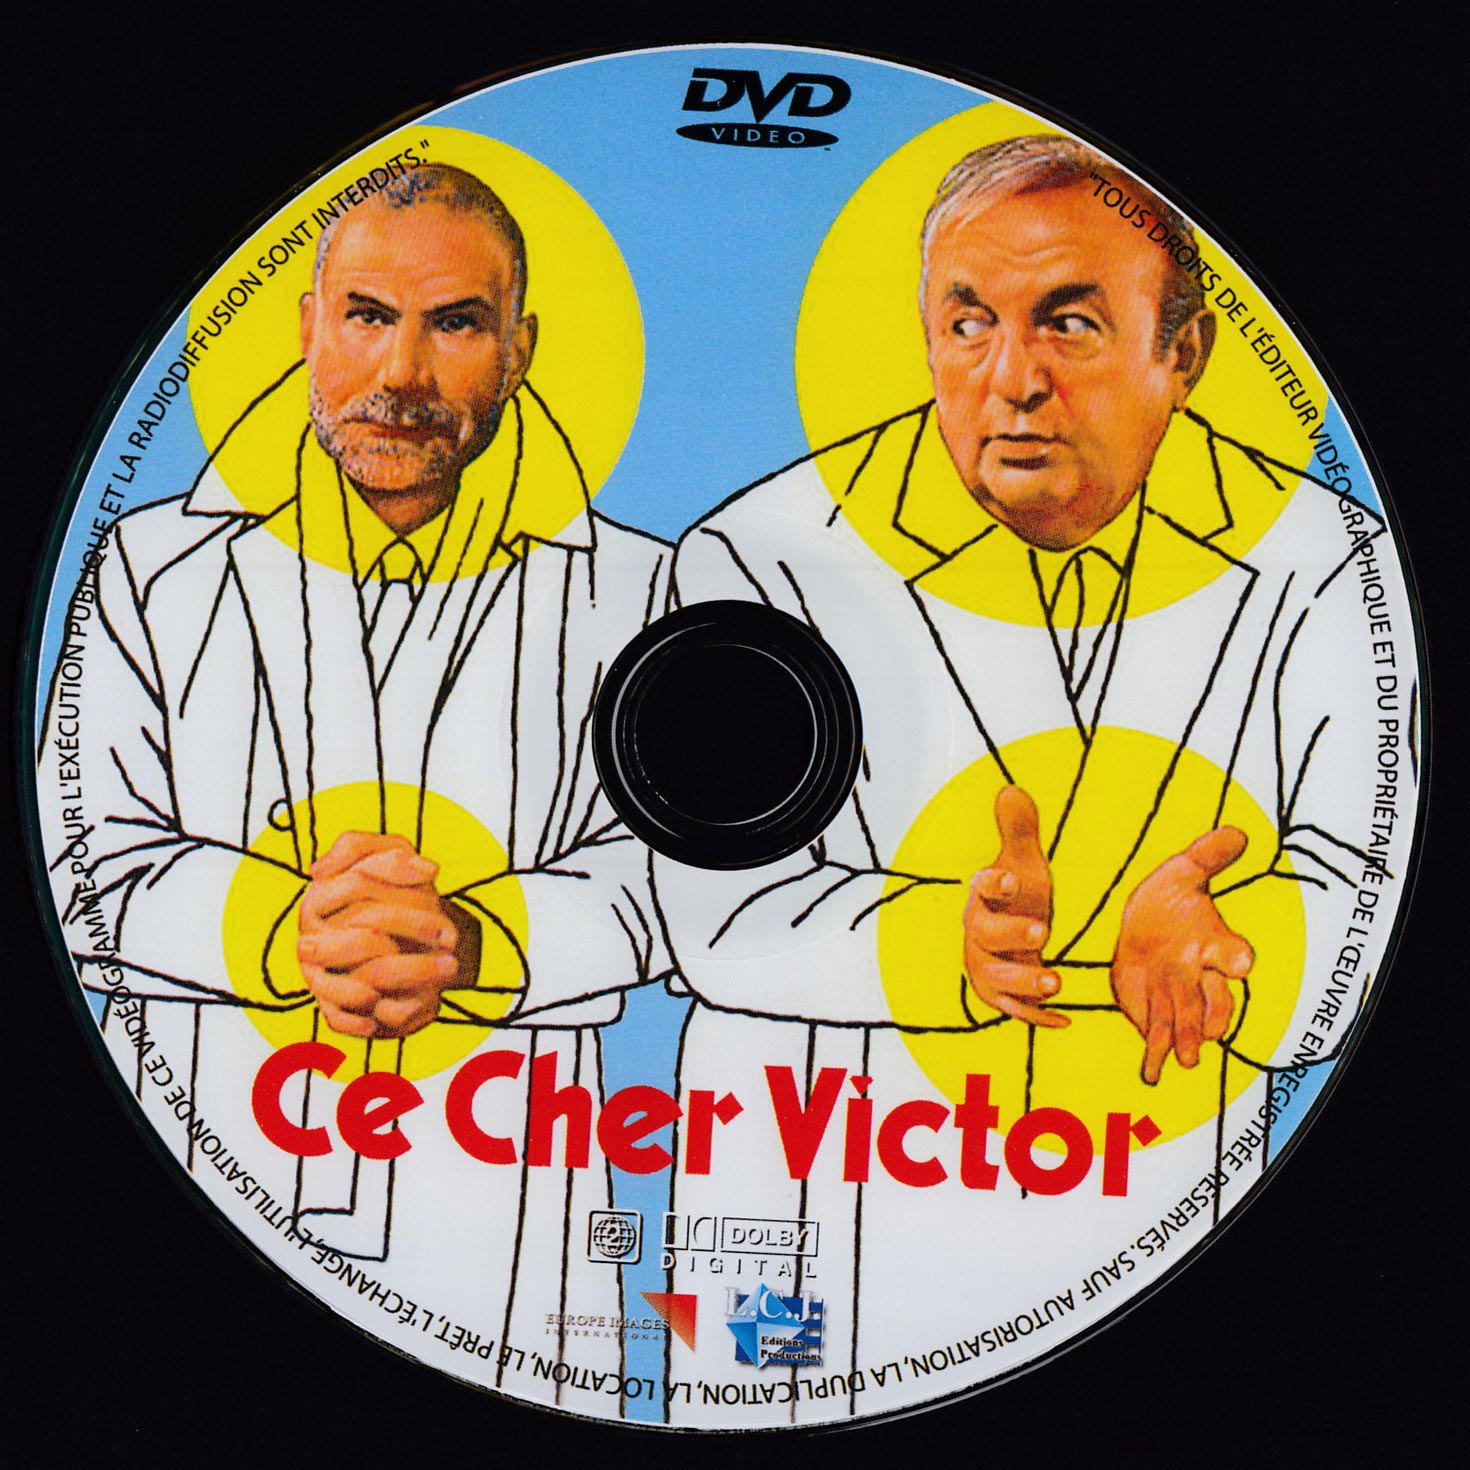 Ce cher Victor